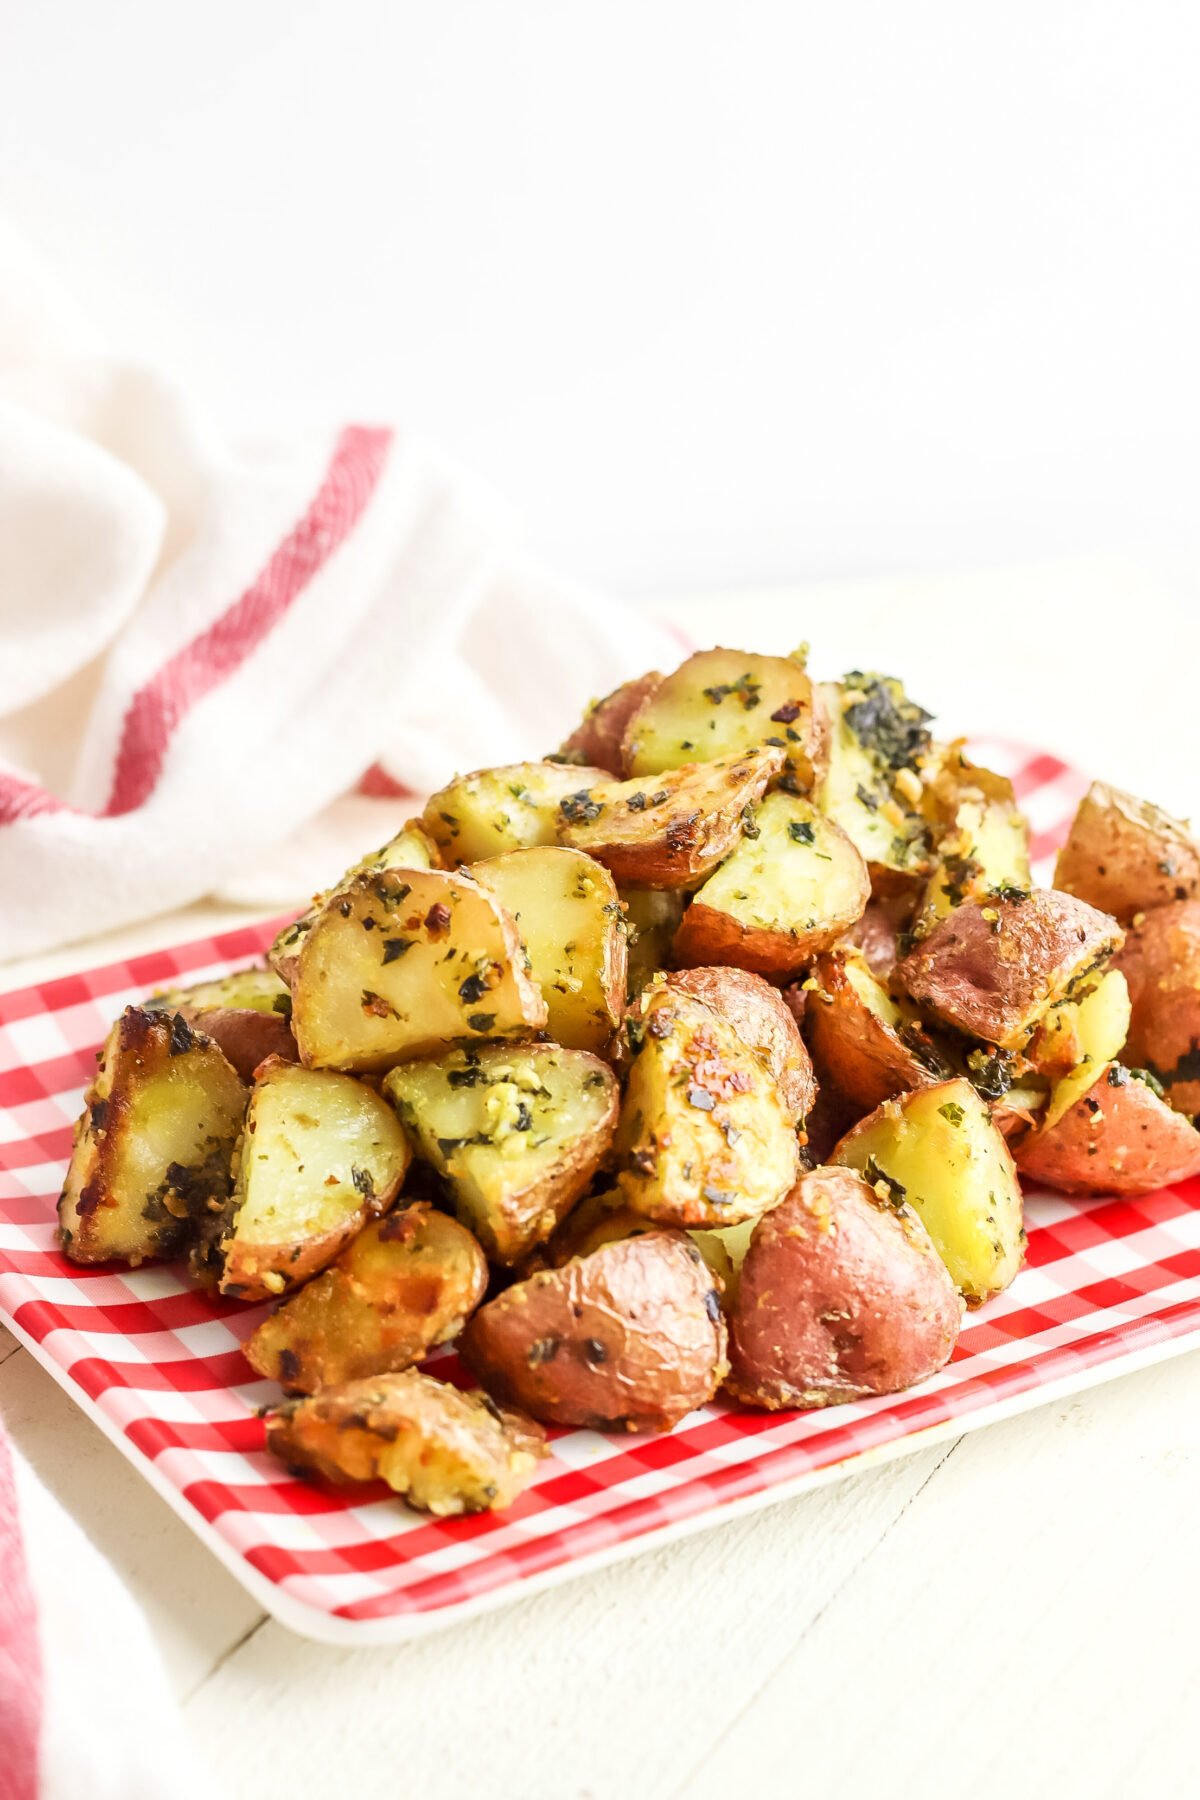 These Pesto Roasted Potatoes are such a classic side dish that goes well with a variety of proteins! Tender potatoes, coated with flavourful pesto and roasted to crispy perfection.